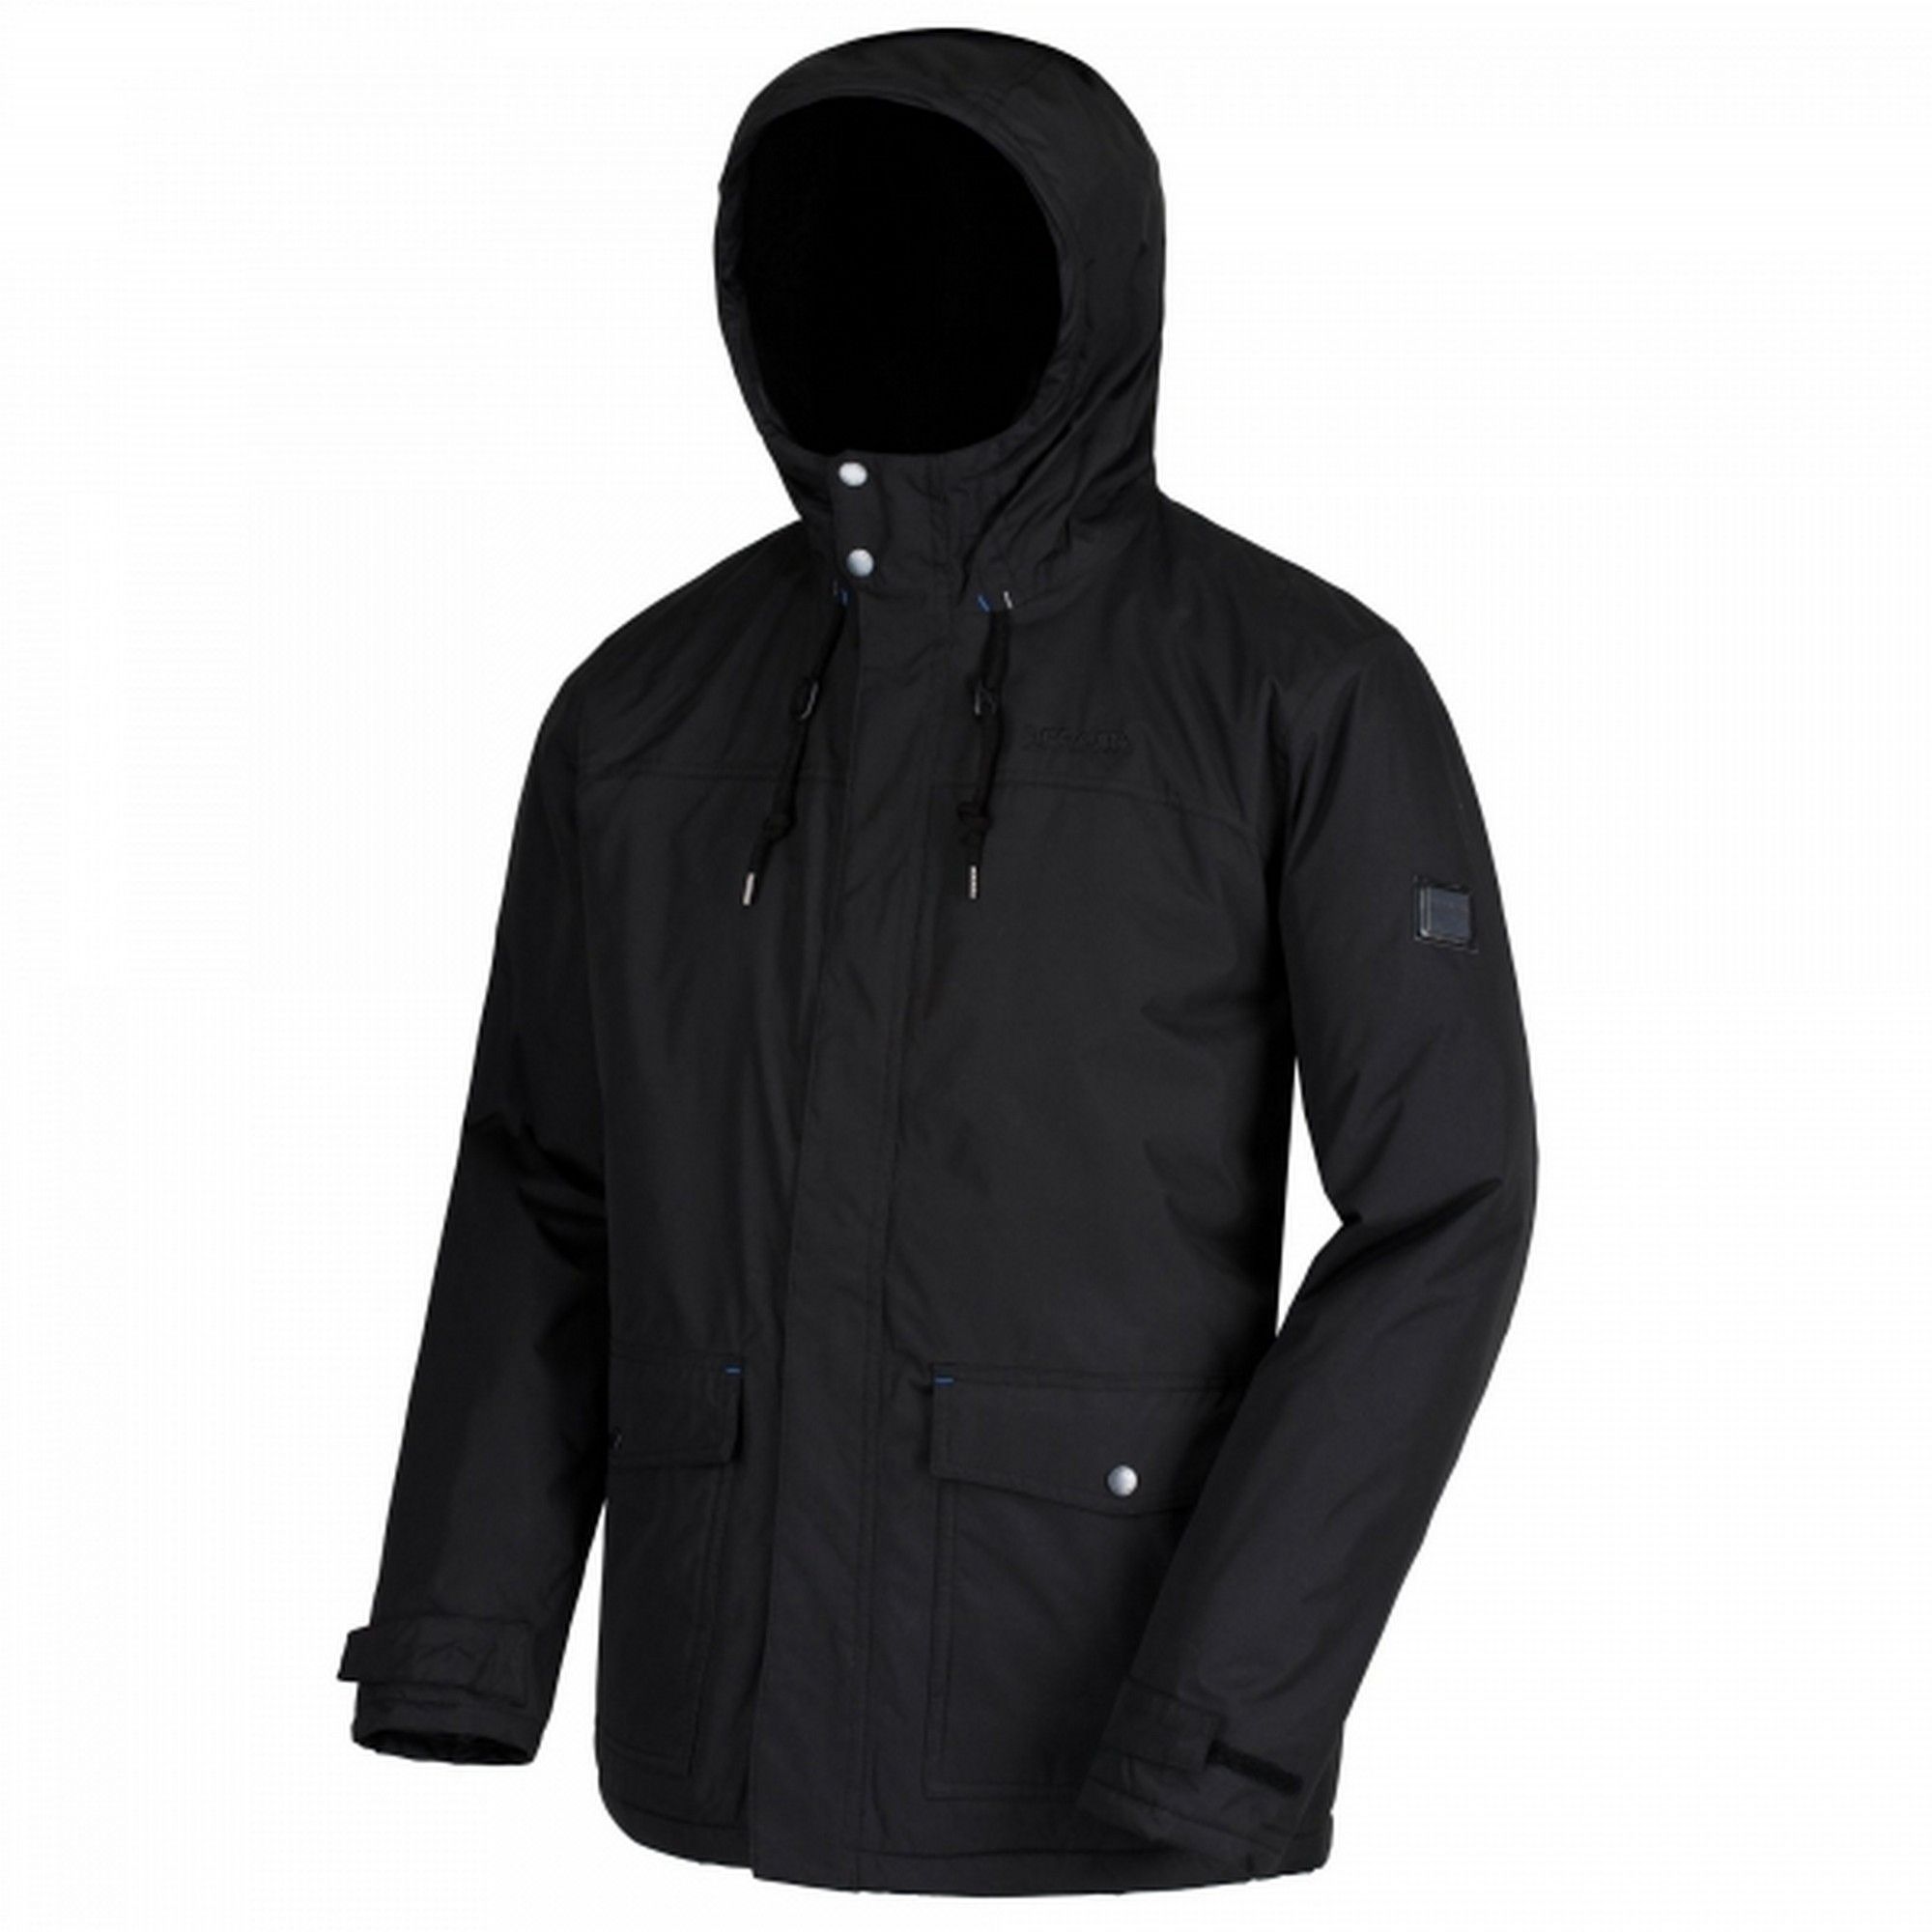 Mens hooded jacket made of waterproof Hydrafort Polyester fabric. Taped seams. Durable water repellent finish. Polyester lining with strategic sherpa fleece panel to body and hood. Internal zipped security pocket. Adjustable cuffs. 2 lower patch pockets with handwarmer pockets behind. Adjustable drawcord hem. Ideal for wearing outdoors on a cold day. 100% Polyester.